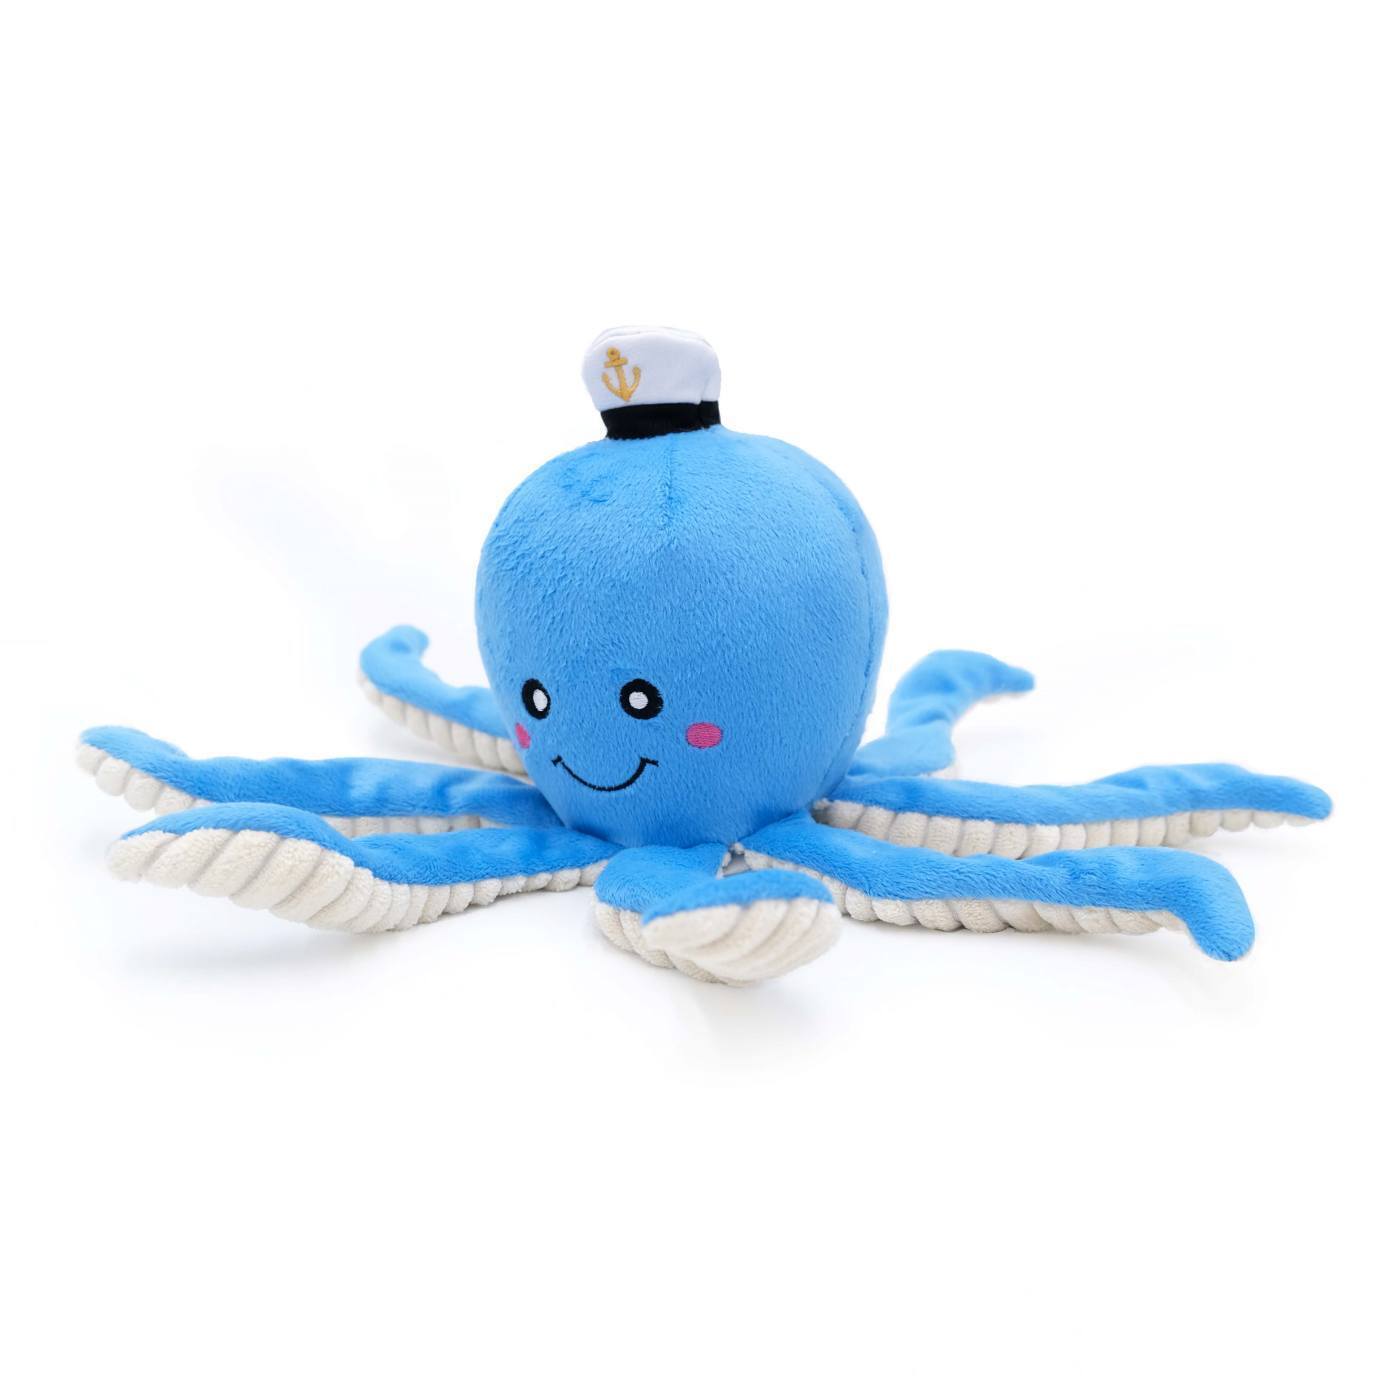 Zippy Paws Playful Pal Plush Squeaker Rope Dog Toy - Ollie the Octopus - Pets and More